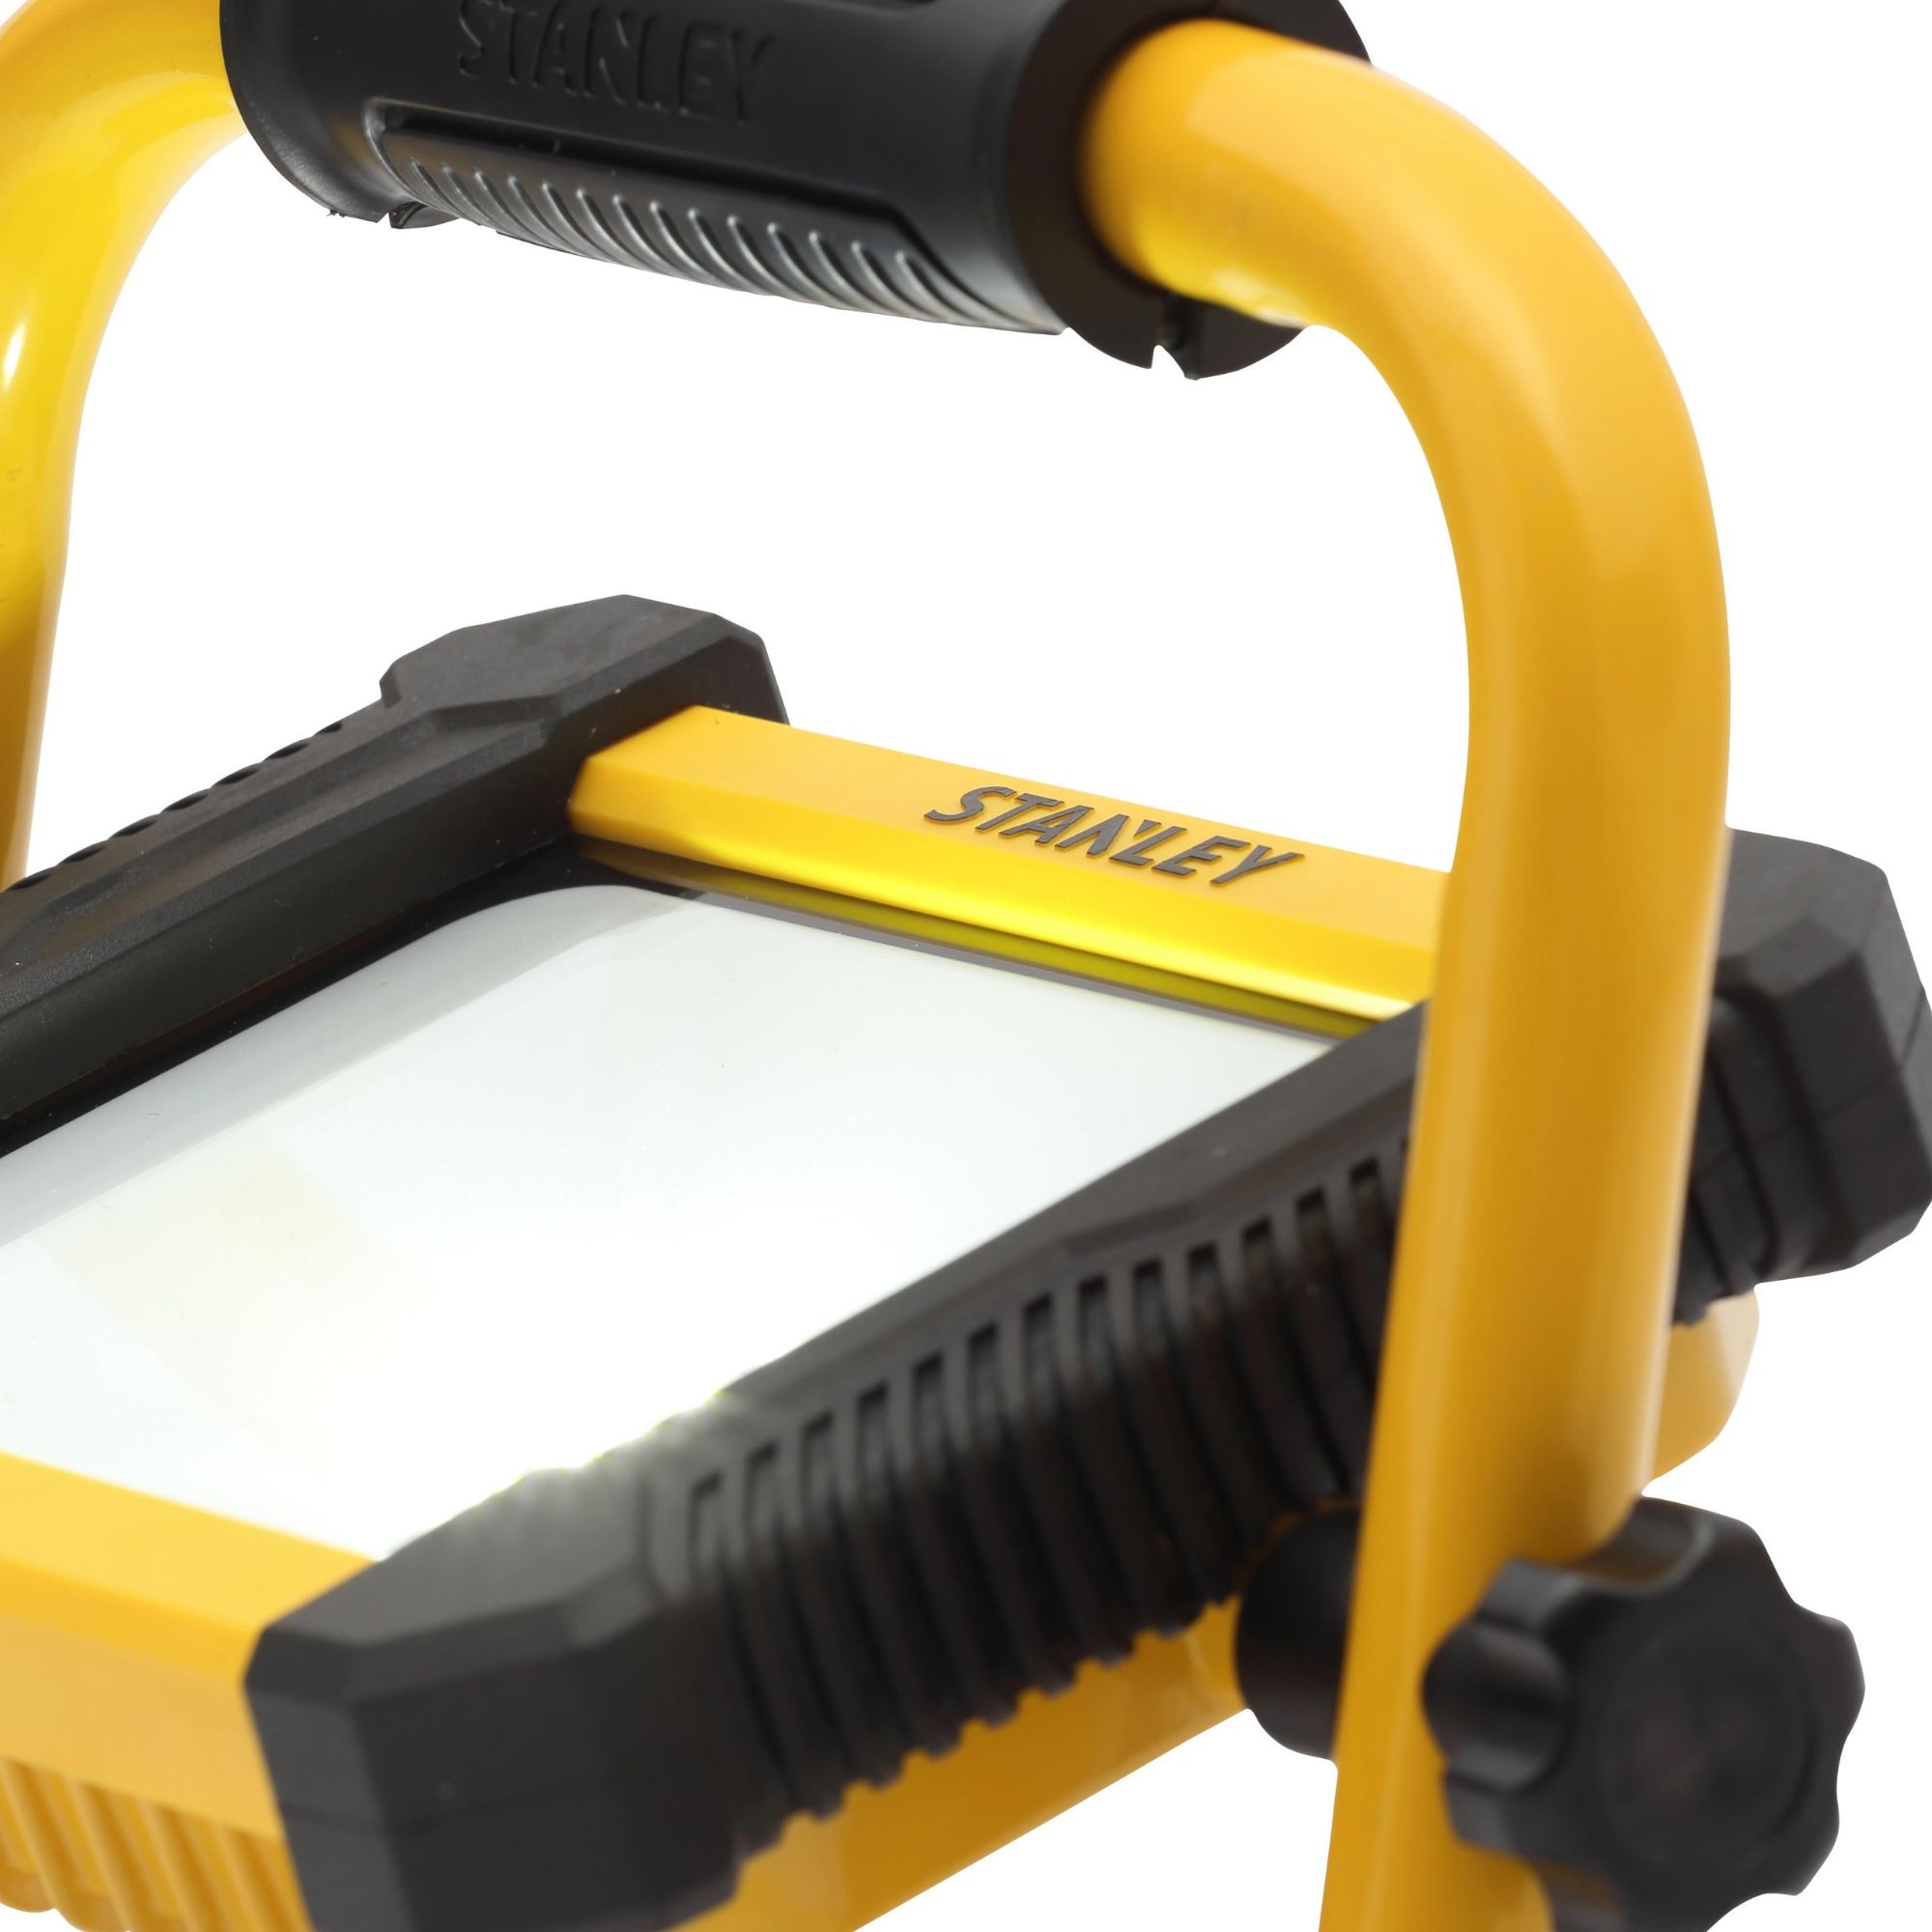 Stanley 10W 800lm Corded Integrated LED Work light